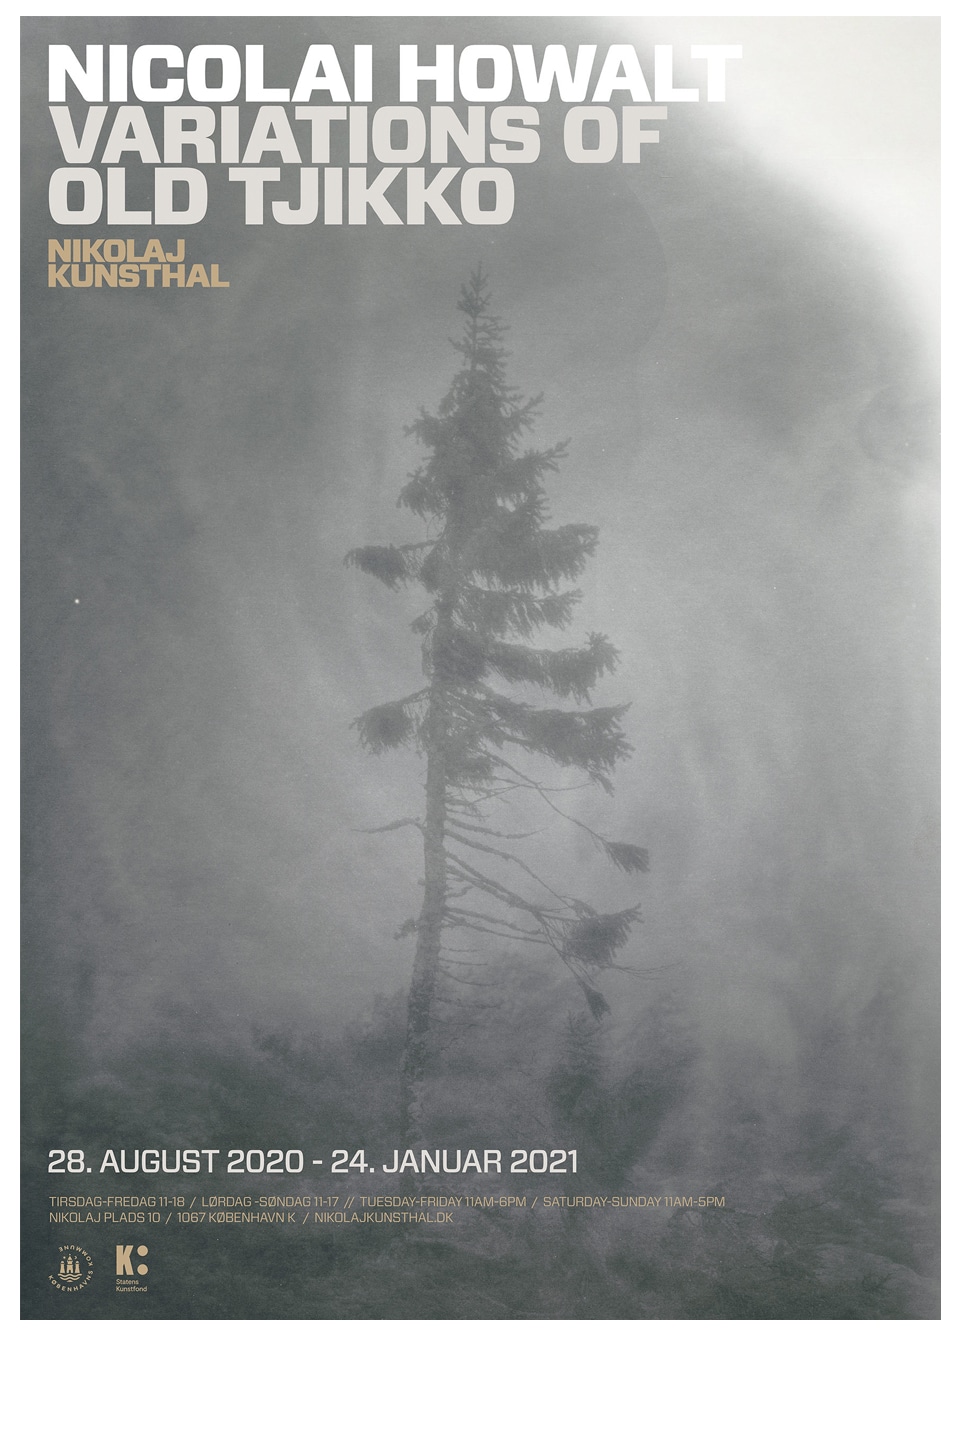 Exhibition poster featuring an image of the tree Old Tjikko by artist Nicolai Howalt